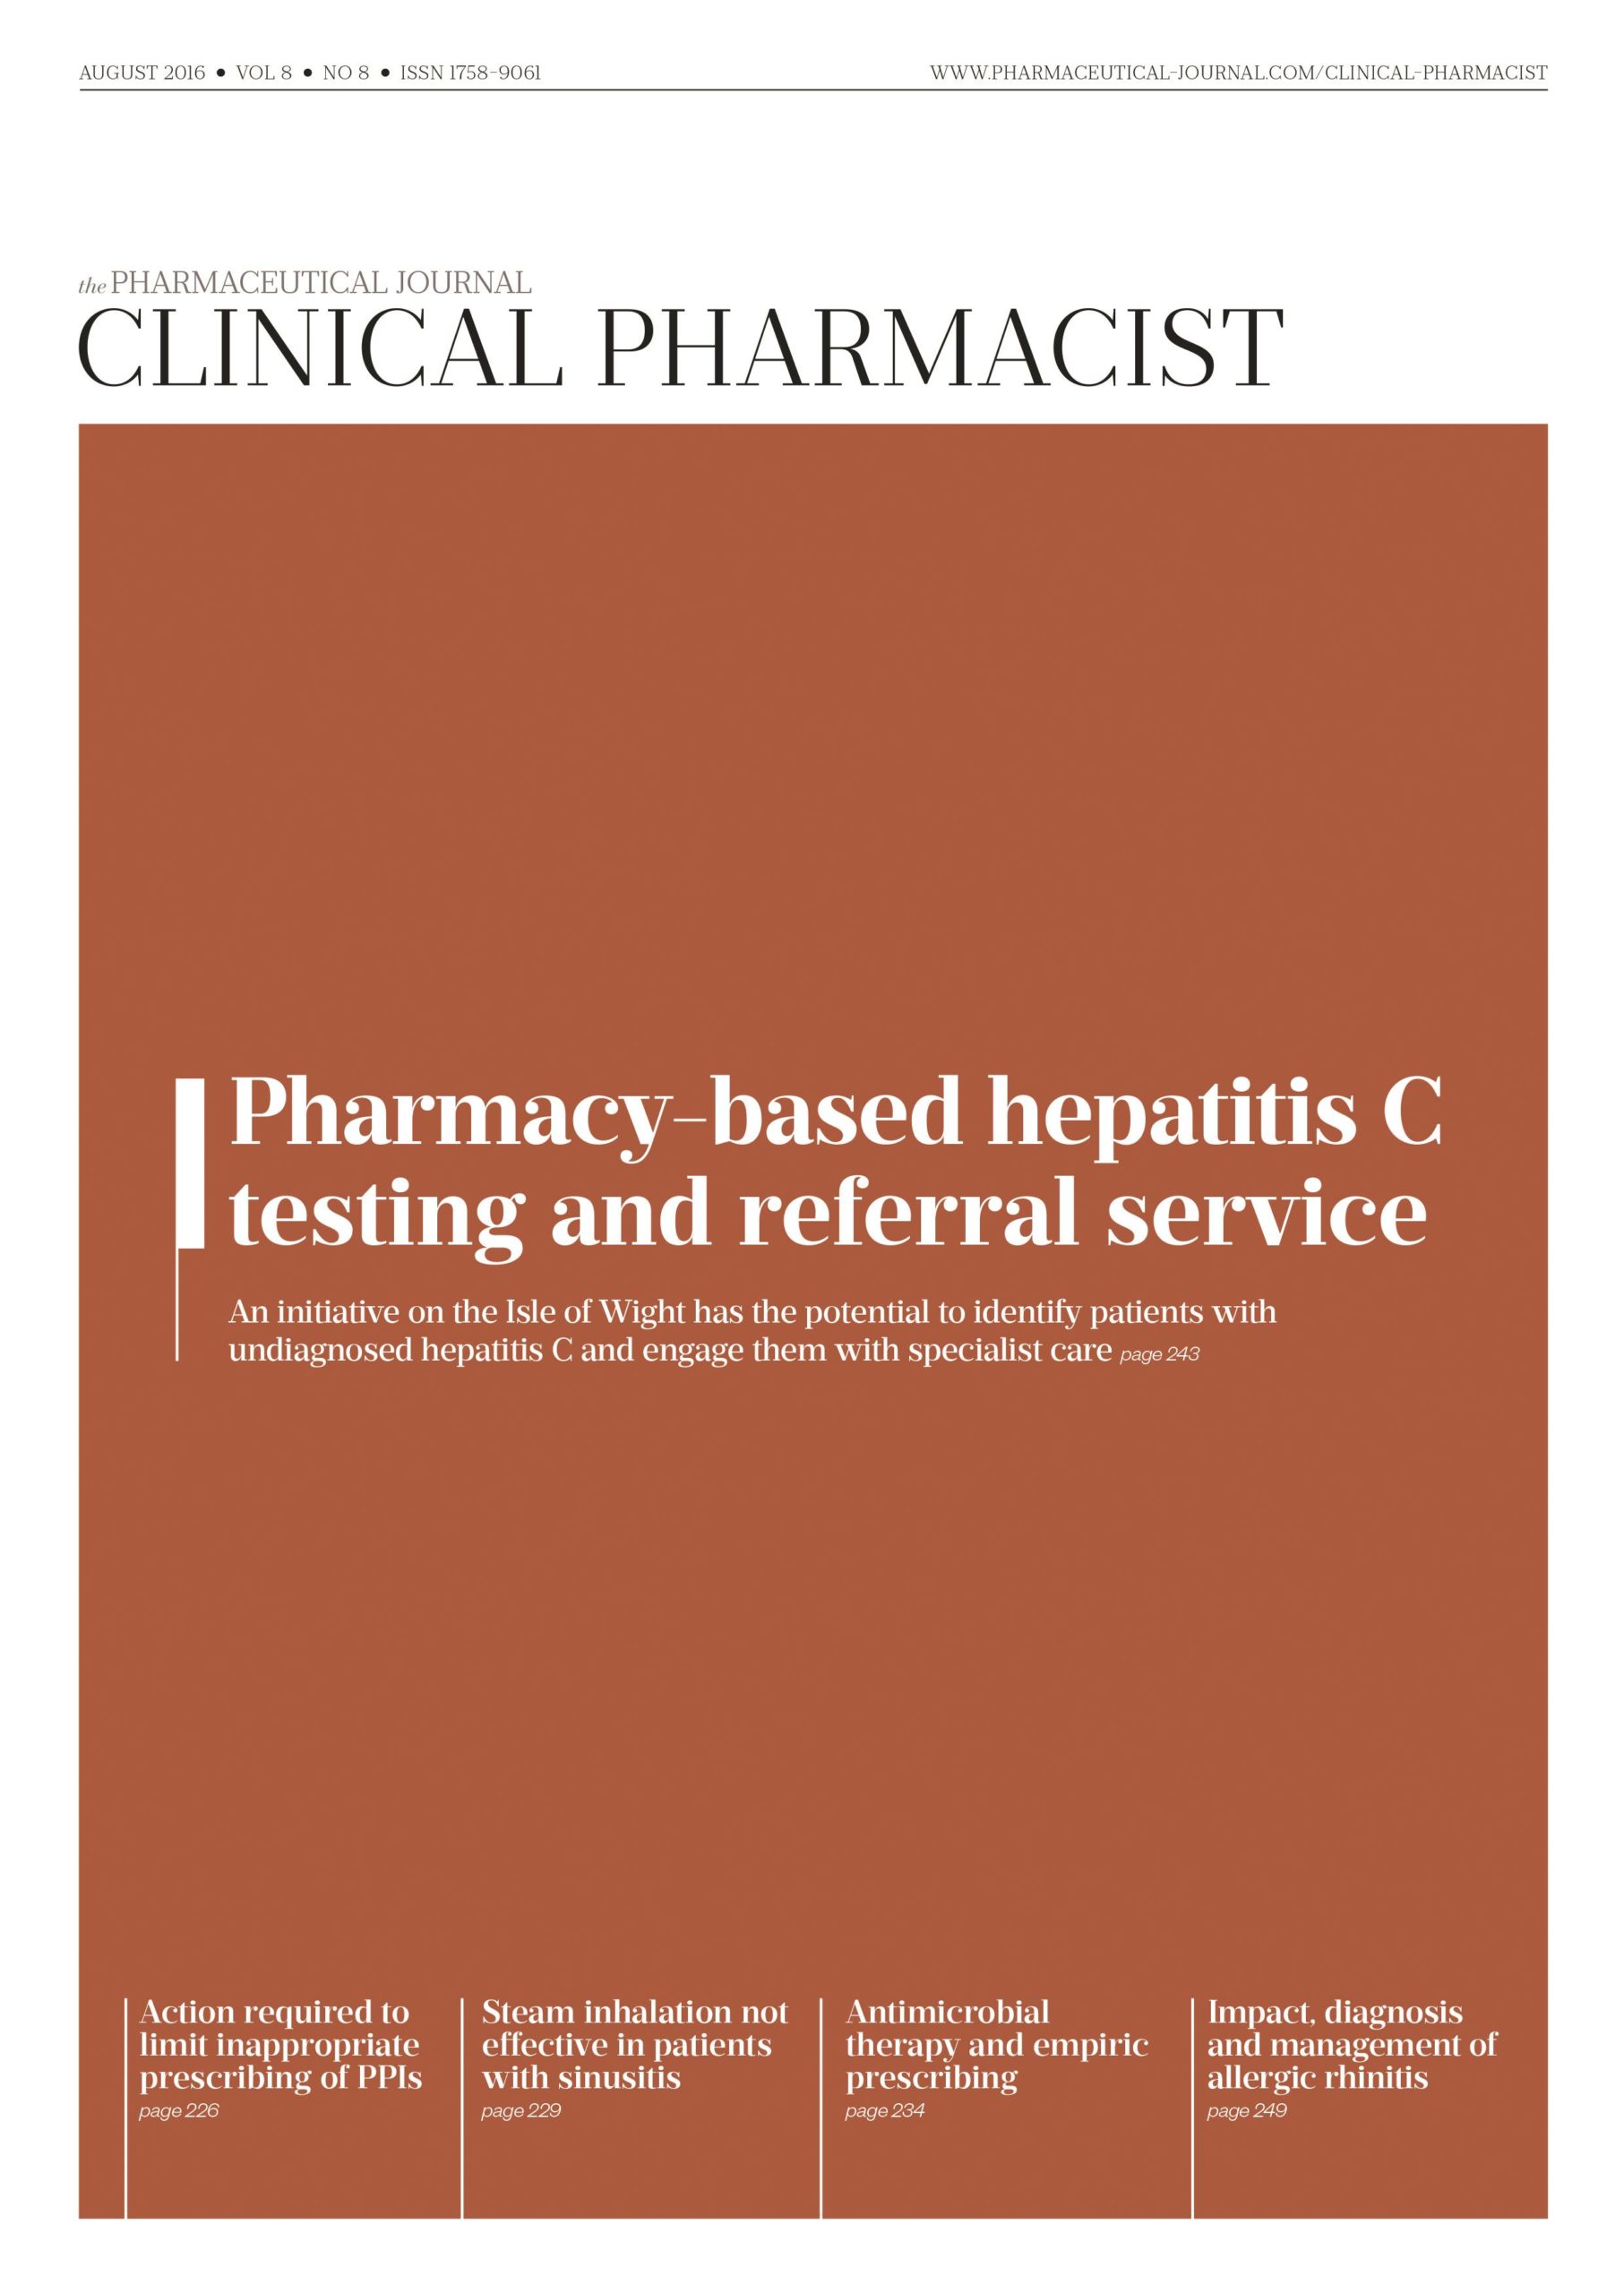 Publication issue cover for CP, August 2016, Vol 8, No 8